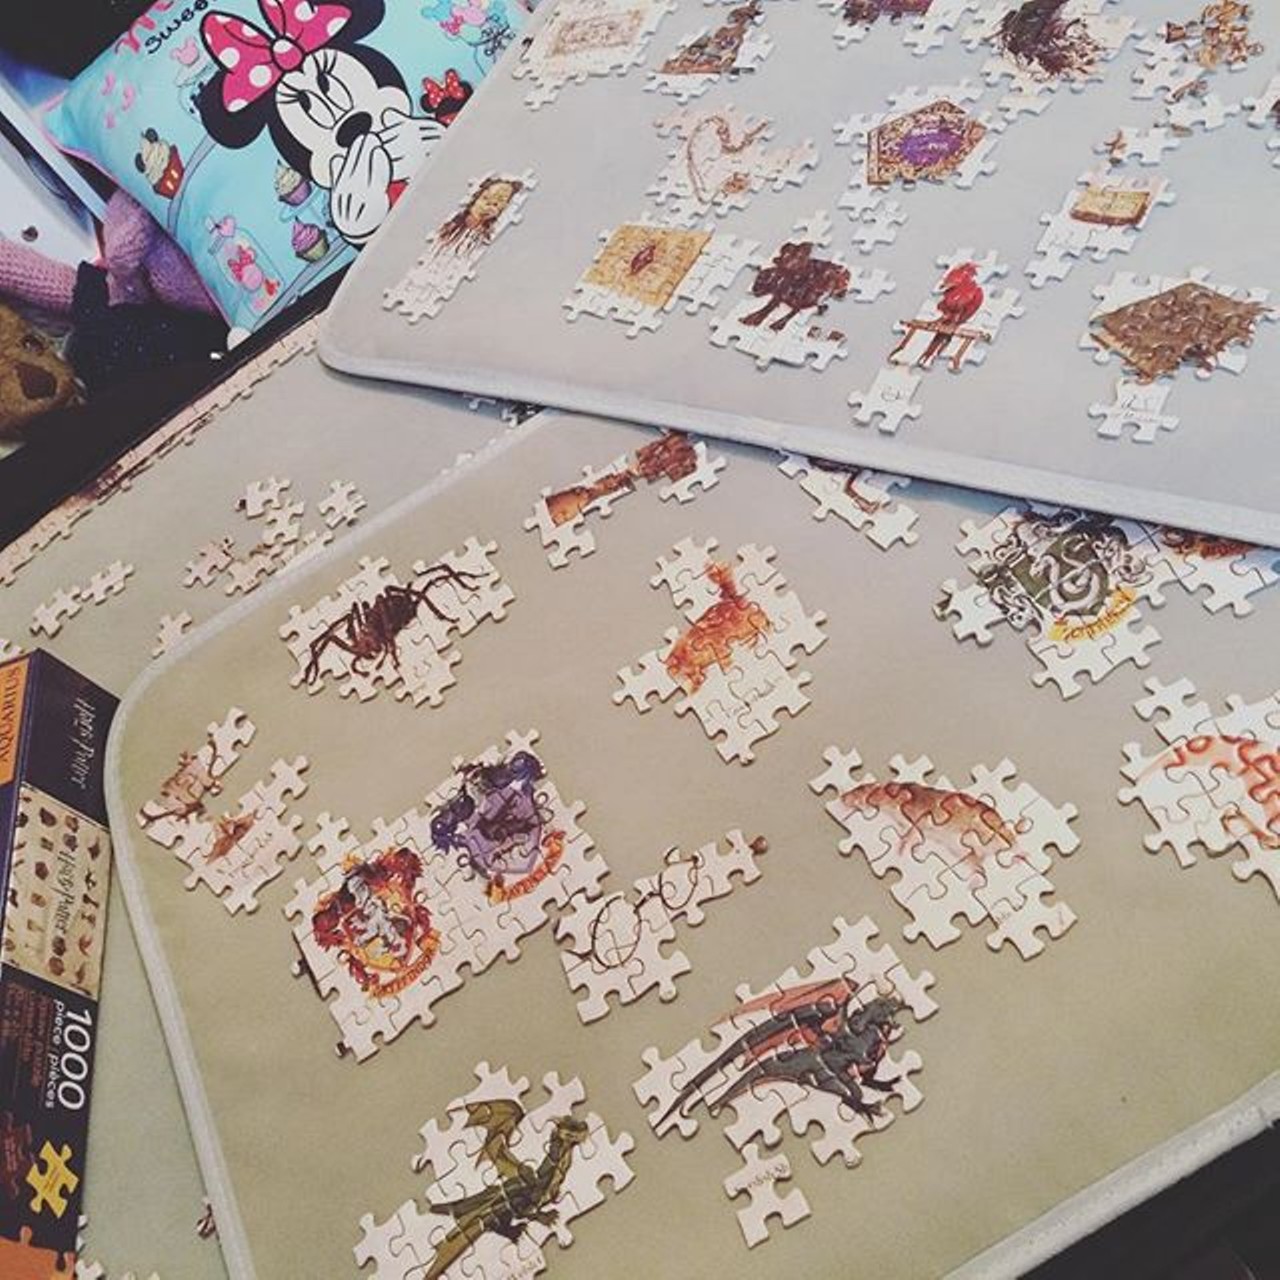 Bust out a puzzle
Ride the rollercoaster of frustration that is putting together a puzzle. Corners first guys, that's the key. (Photo via Instagram user @Pidgylou)